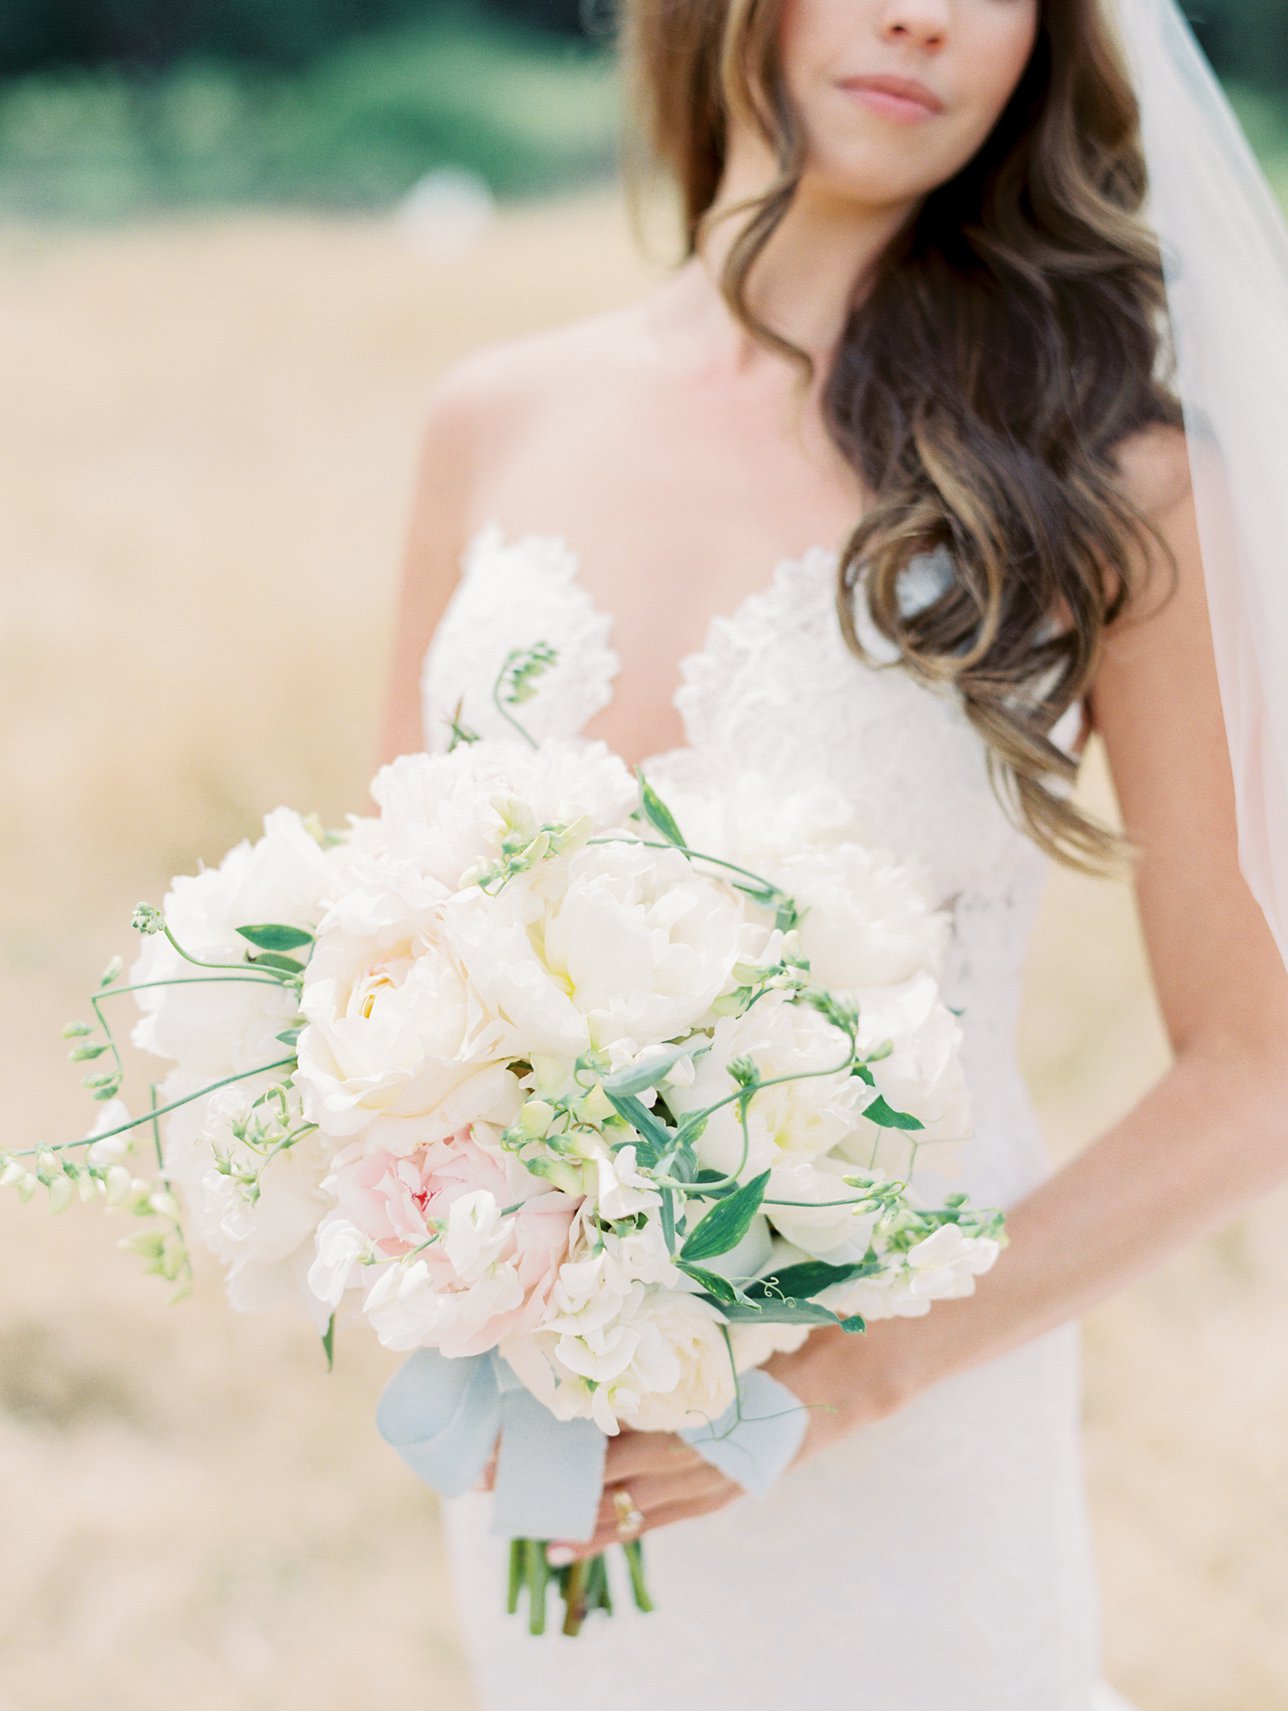 HammerSky Vineyards wedding photos - Paso Robles Wedding Photographer | Rachel Solomon Photography_9027